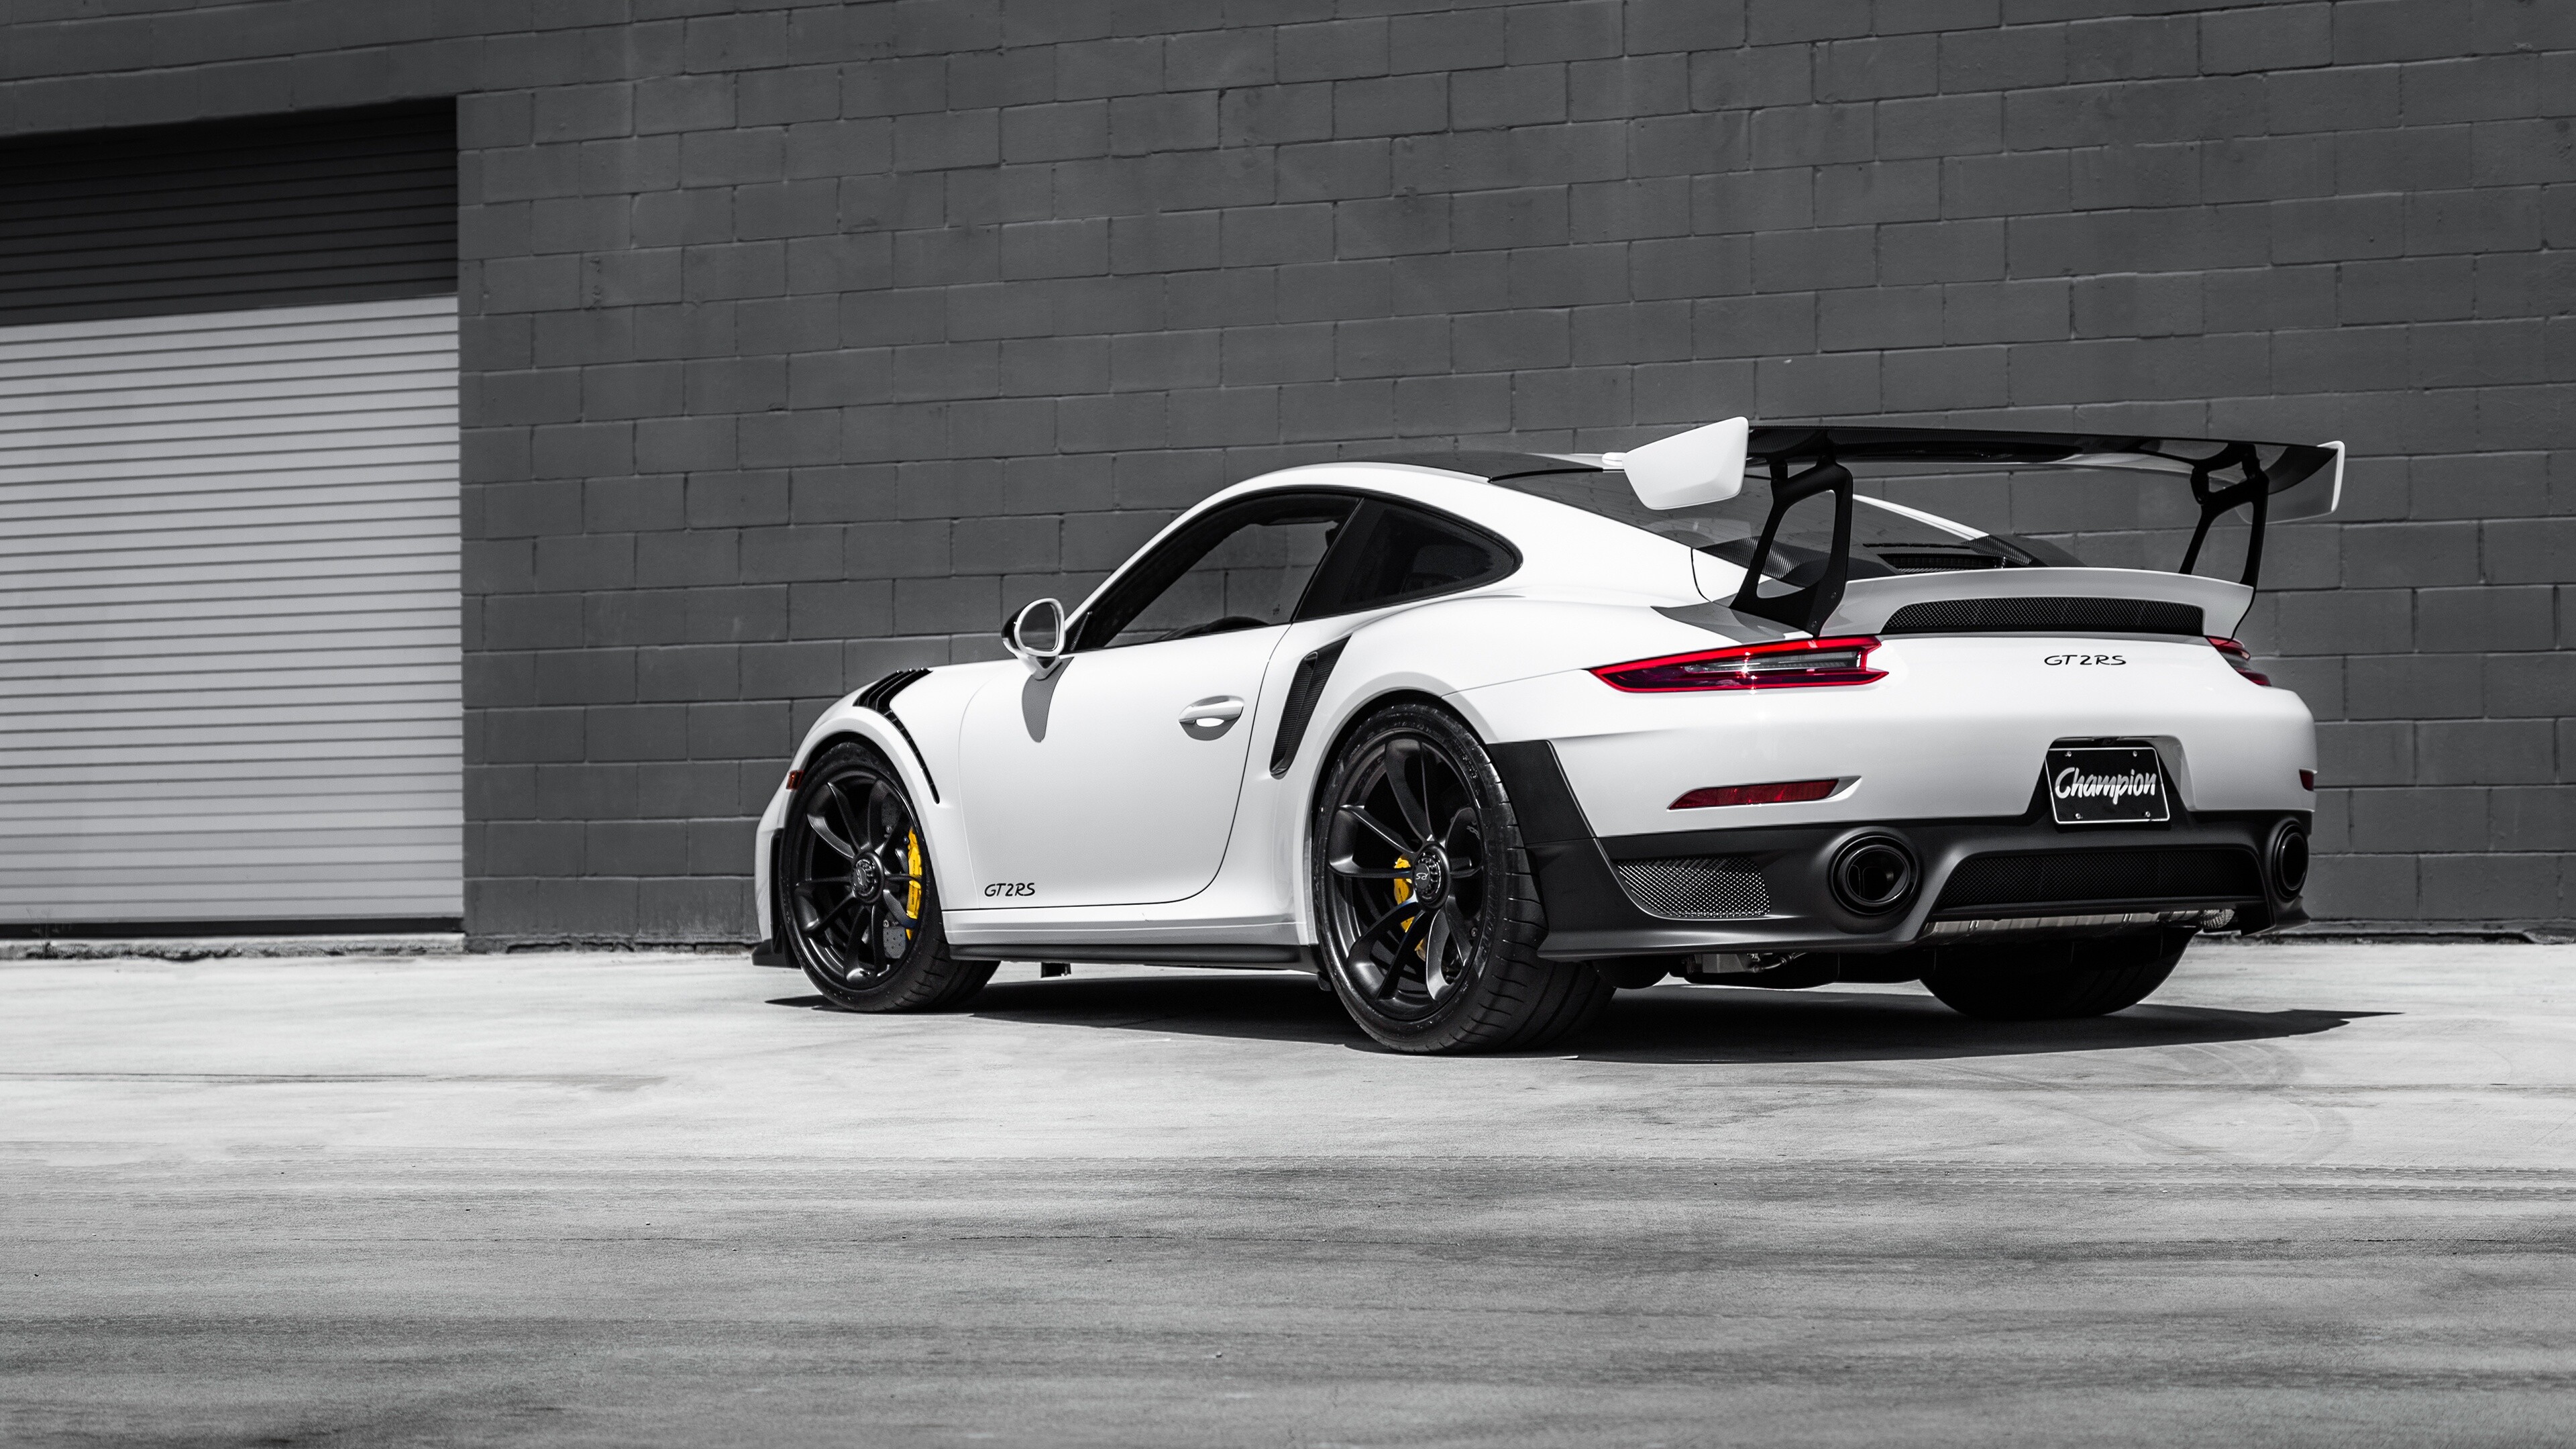 Porsche: The 911 GT2 RS basically teleports from zero to 60 mph in 2.6 seconds and disintegrate a quarter-mile drag strip in 10.3 seconds at 140 mph. 3840x2160 4K Wallpaper.